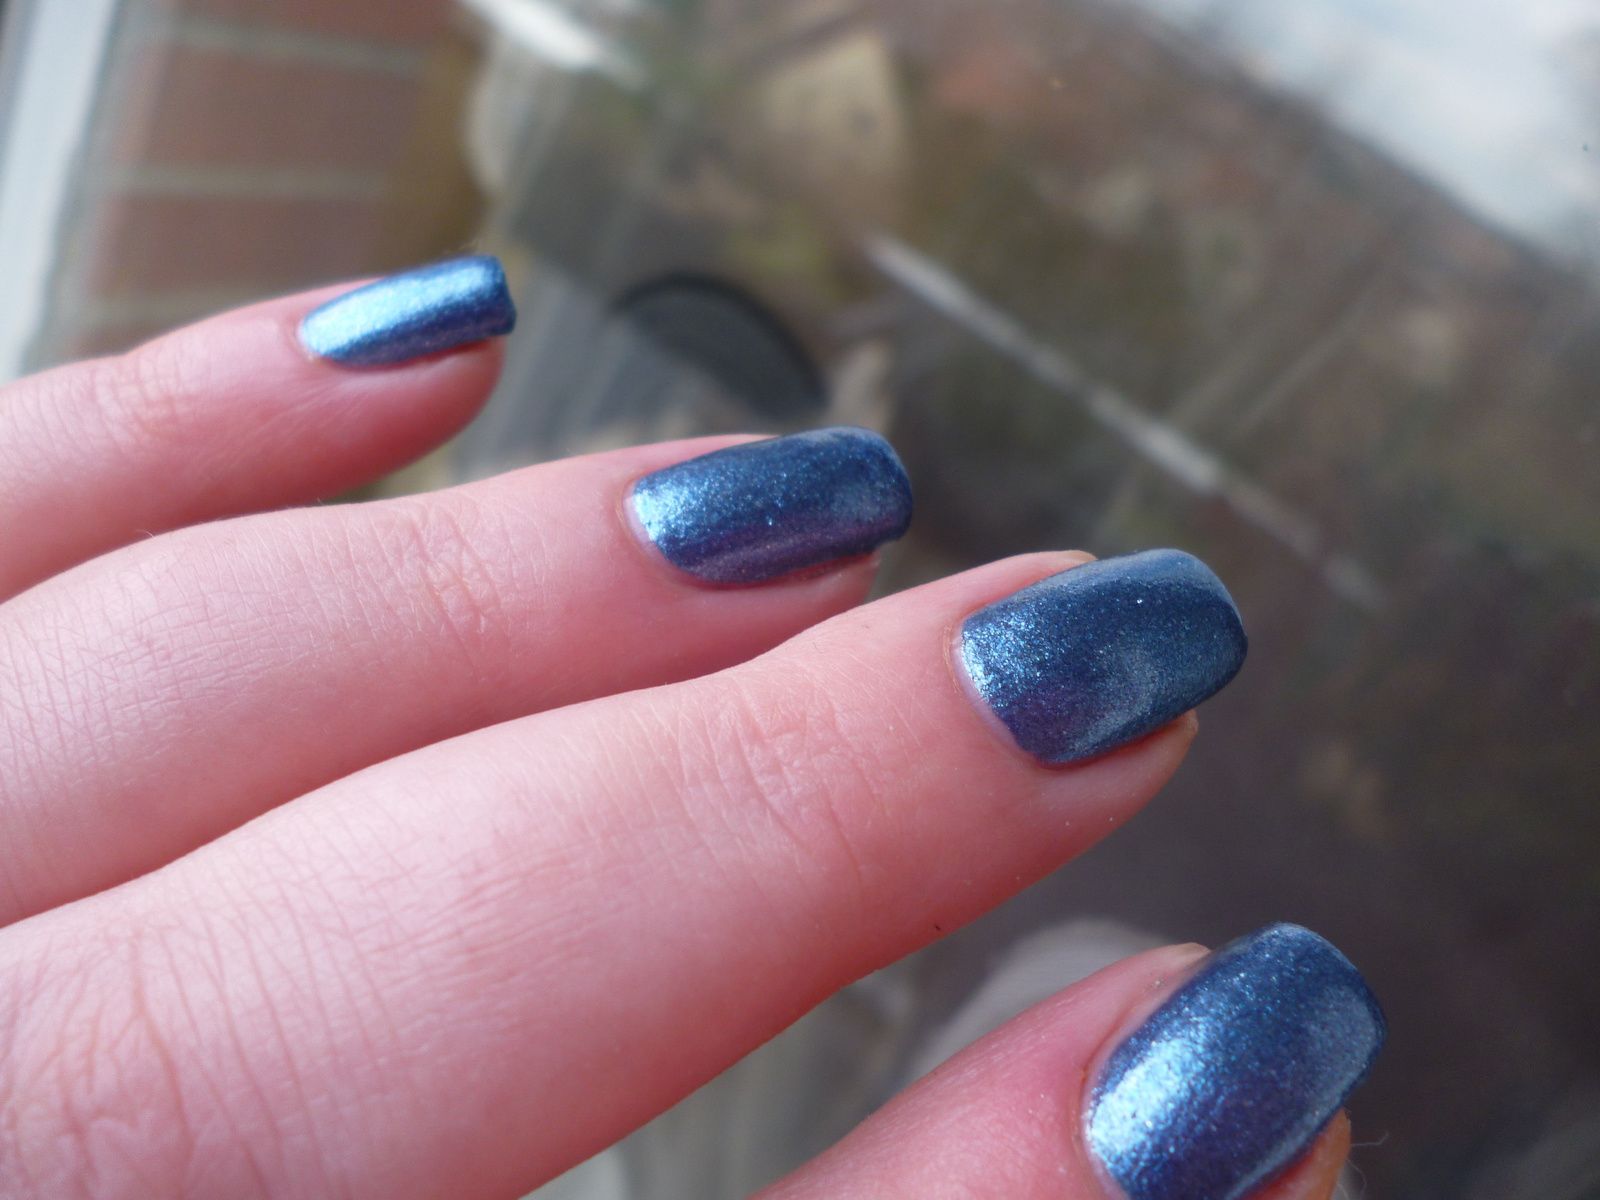 MY EXTREM VERNIS ROYAL ROCK'S-Beautynails